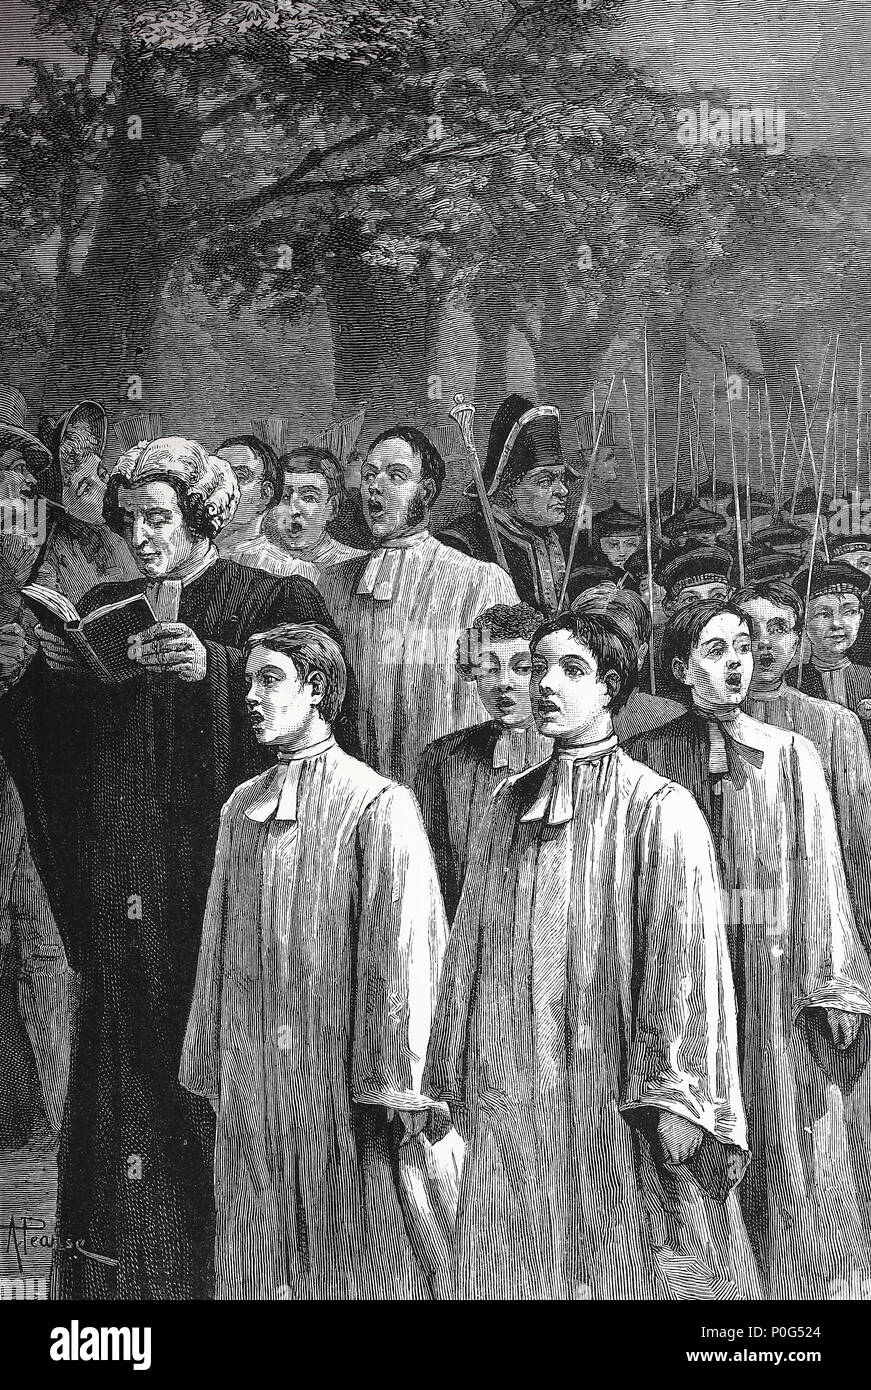 Rogation day in the olden times, beating the bounds, Rogation days are days of prayer and fasting in Western Christianity. They are observed with processions and the Litany of the Saints, digital improved reproduction of an original print from the year 1881 Stock Photo